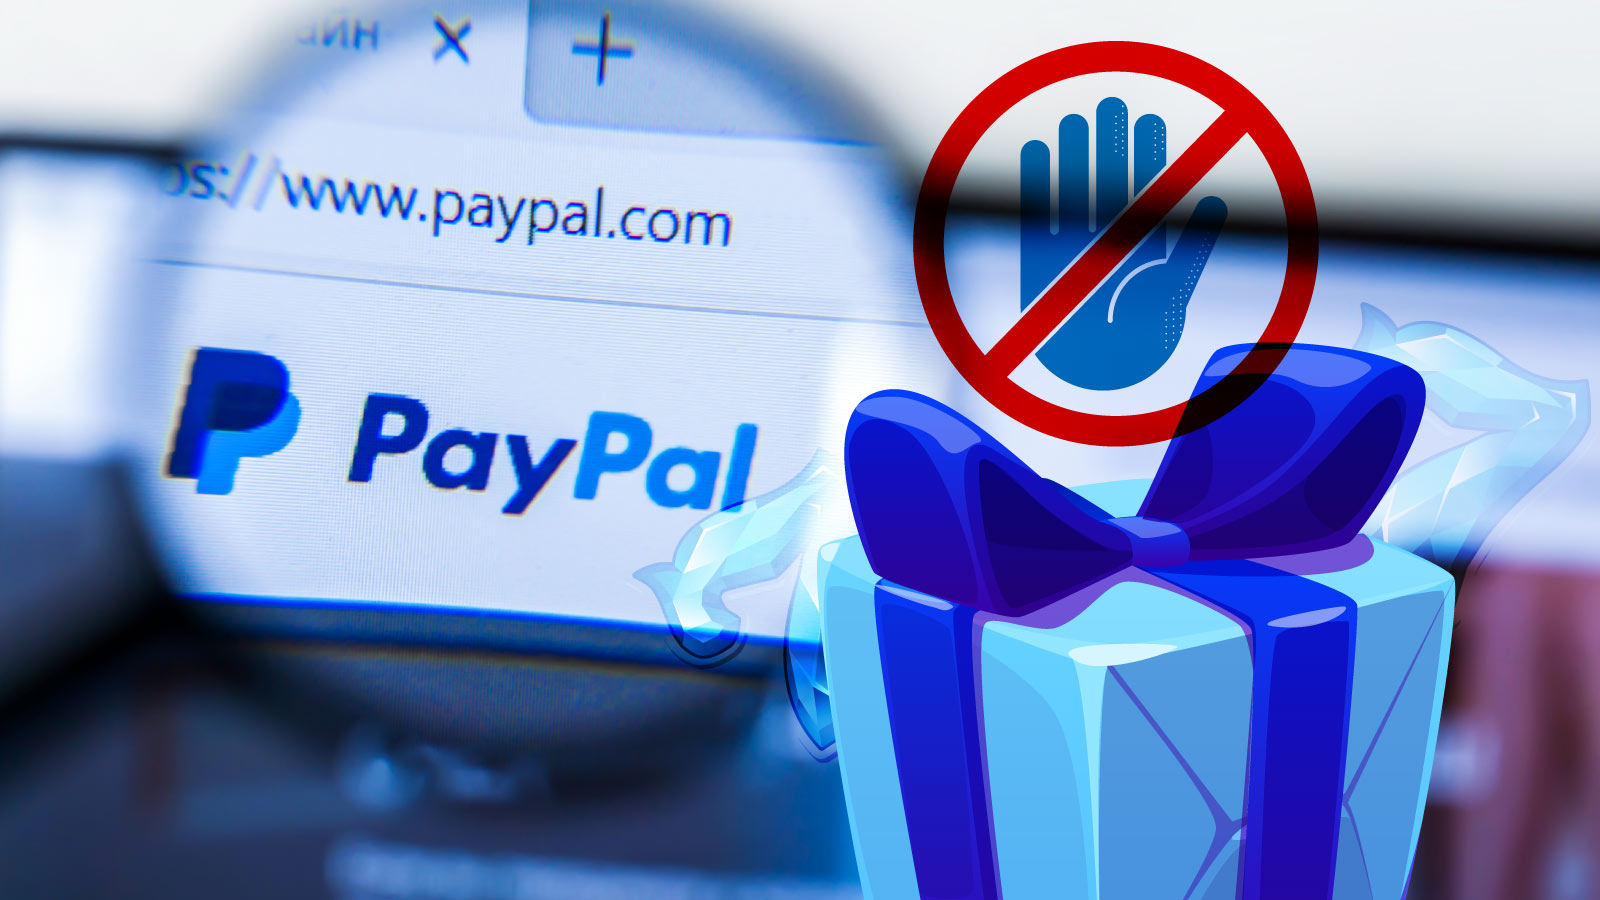 Don’t let PayPal-related Restrictions Limit Your Access to Casino Bonuses